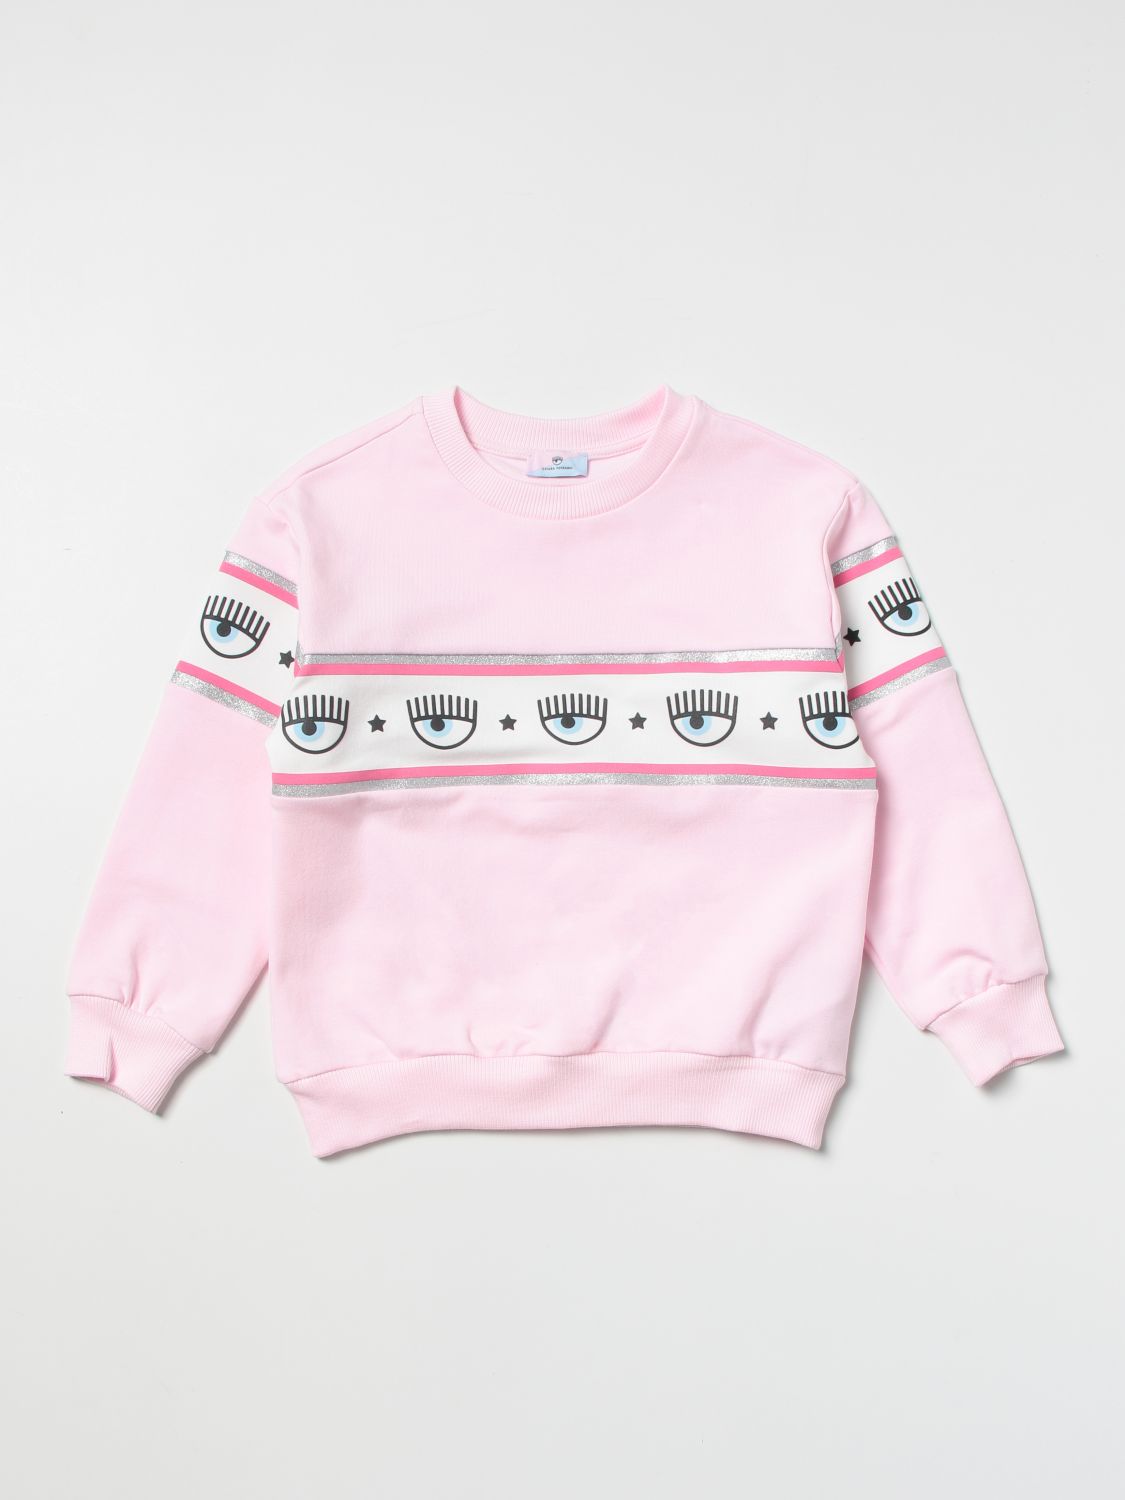 Sweater Chiara Ferragni: Chiara Ferragni sweater for girls pink 1